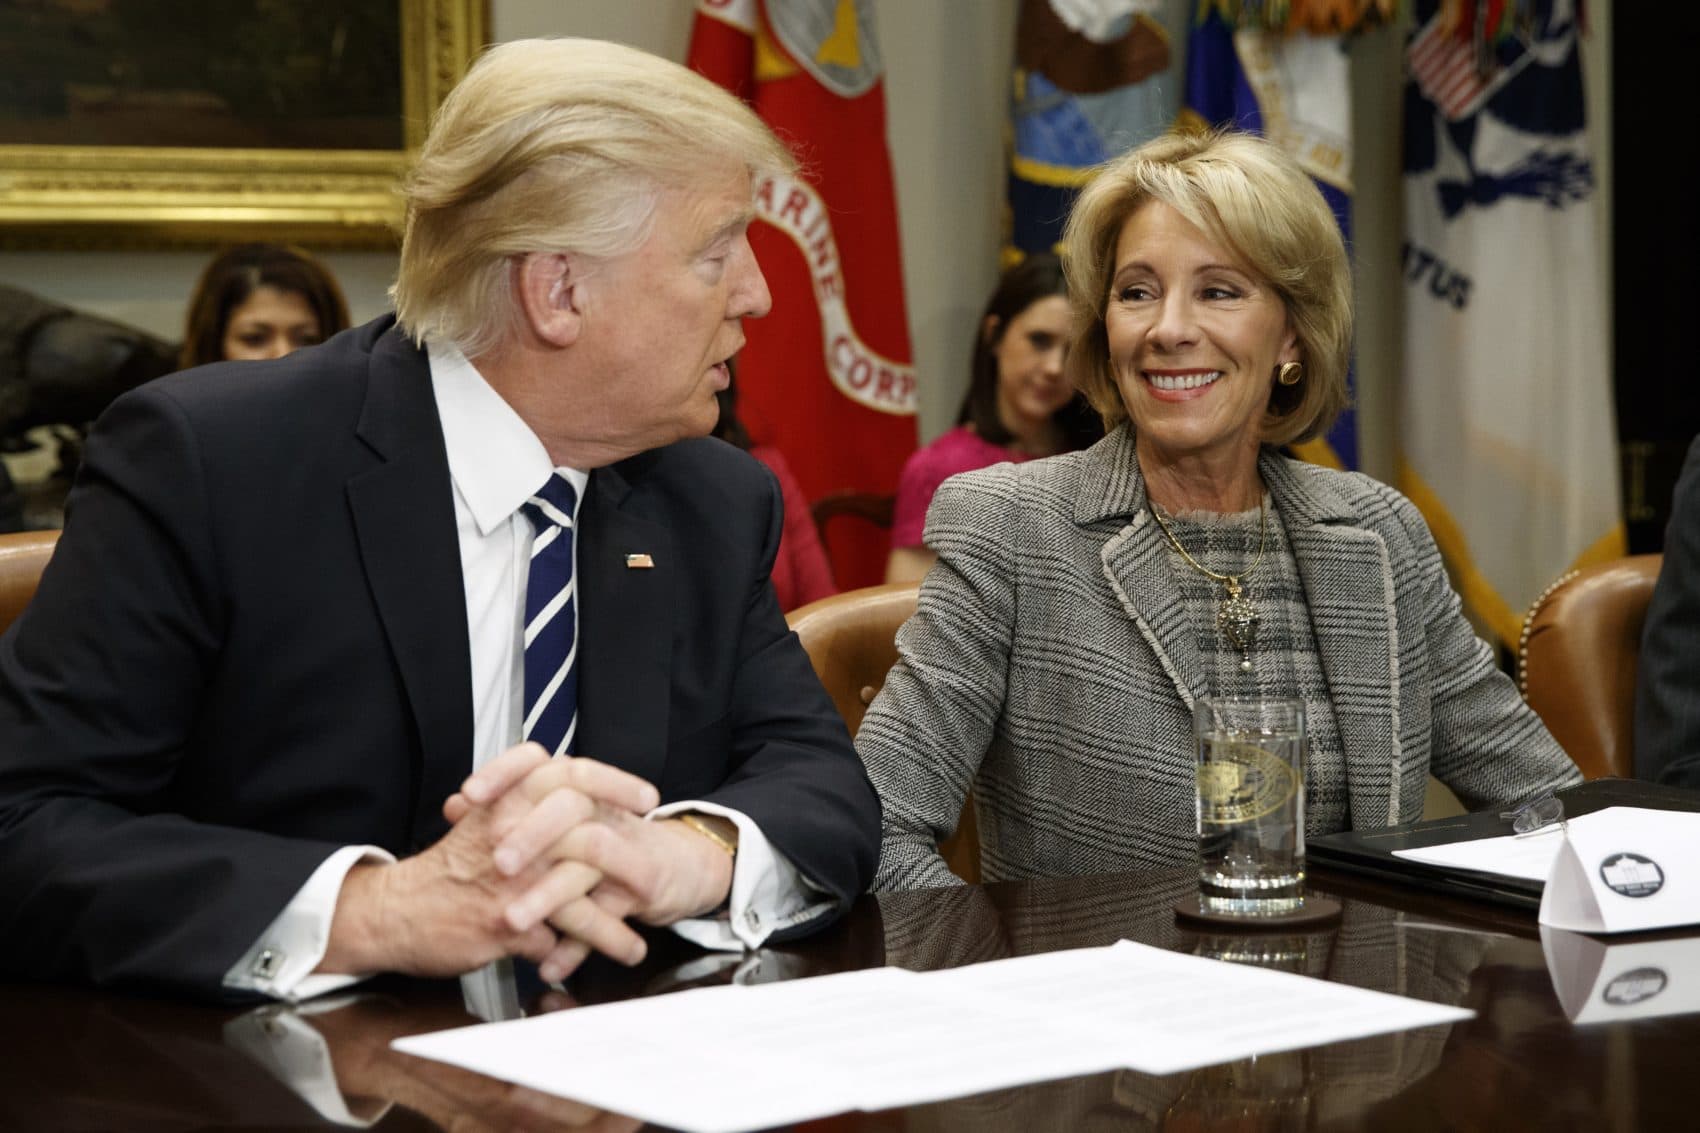 In this Feb. 14, 2017 file photo, President Donald Trump talks to Education Secretary Betsy DeVos in the Roosevelt Room of the White House in Washington. Even as fierce political battles rage in Washington over school choice, most Americans know little about charter schools or private school voucher programs. Still, more Americans feel positively than negatively about expanding those programs, according to a new poll released Friday, May 12, 2017. (Evan Vucci/AP)